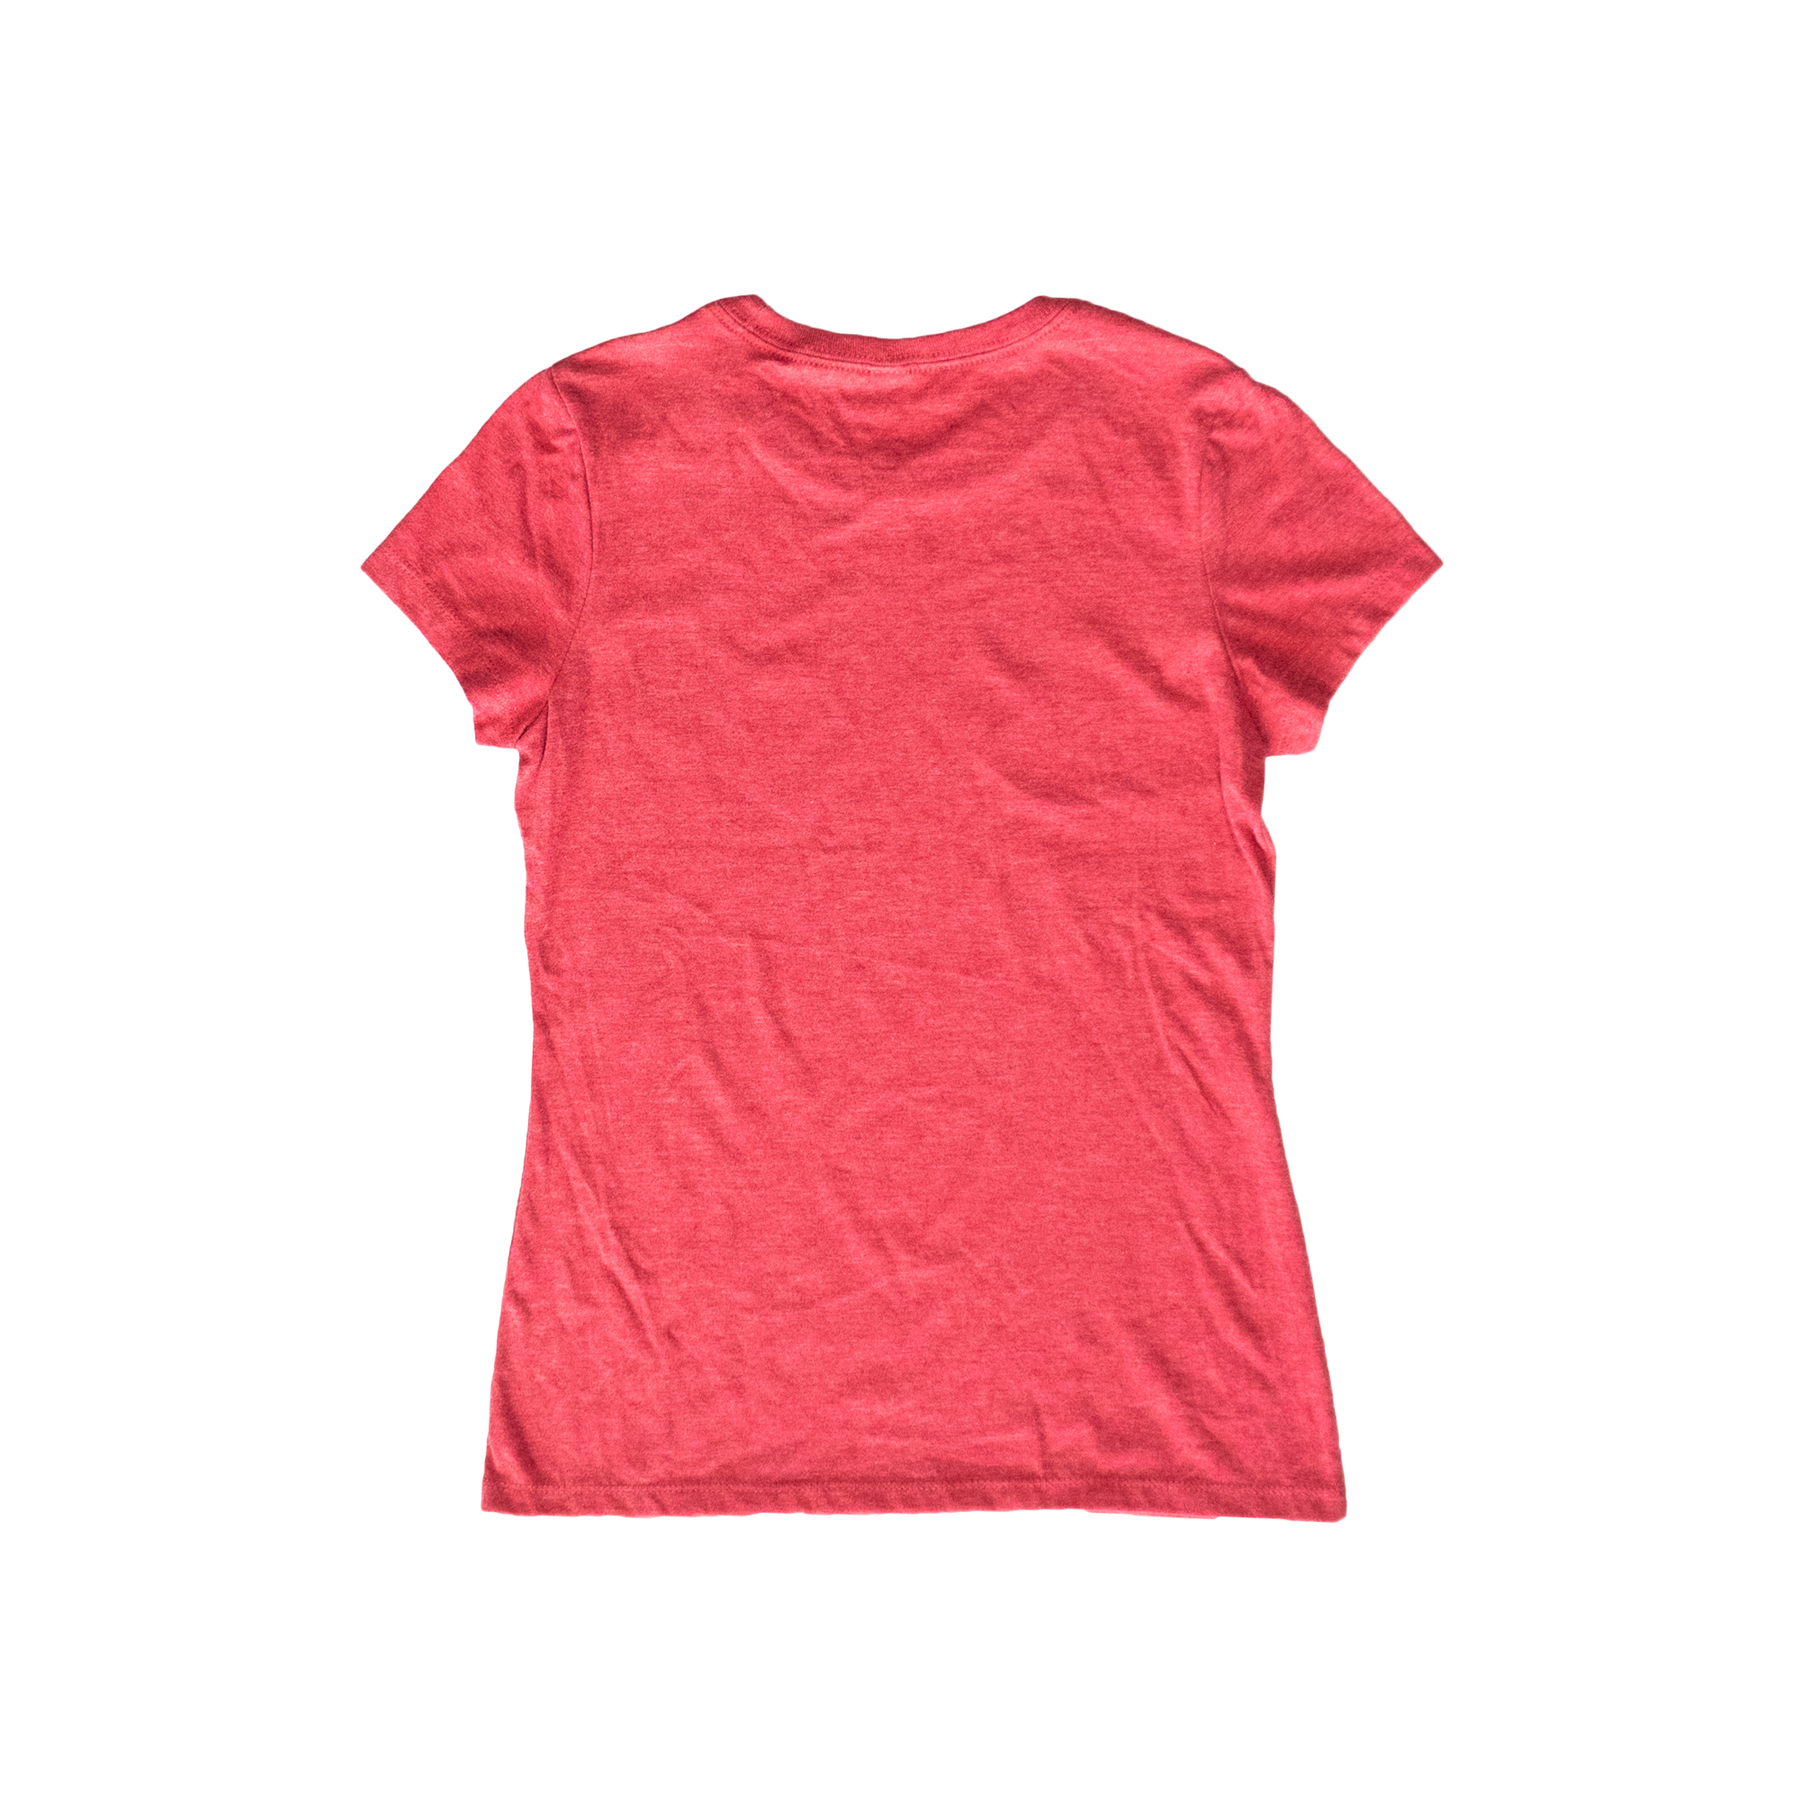 Stand on Liquid "Since 2010" Women's Heathered Red Tee